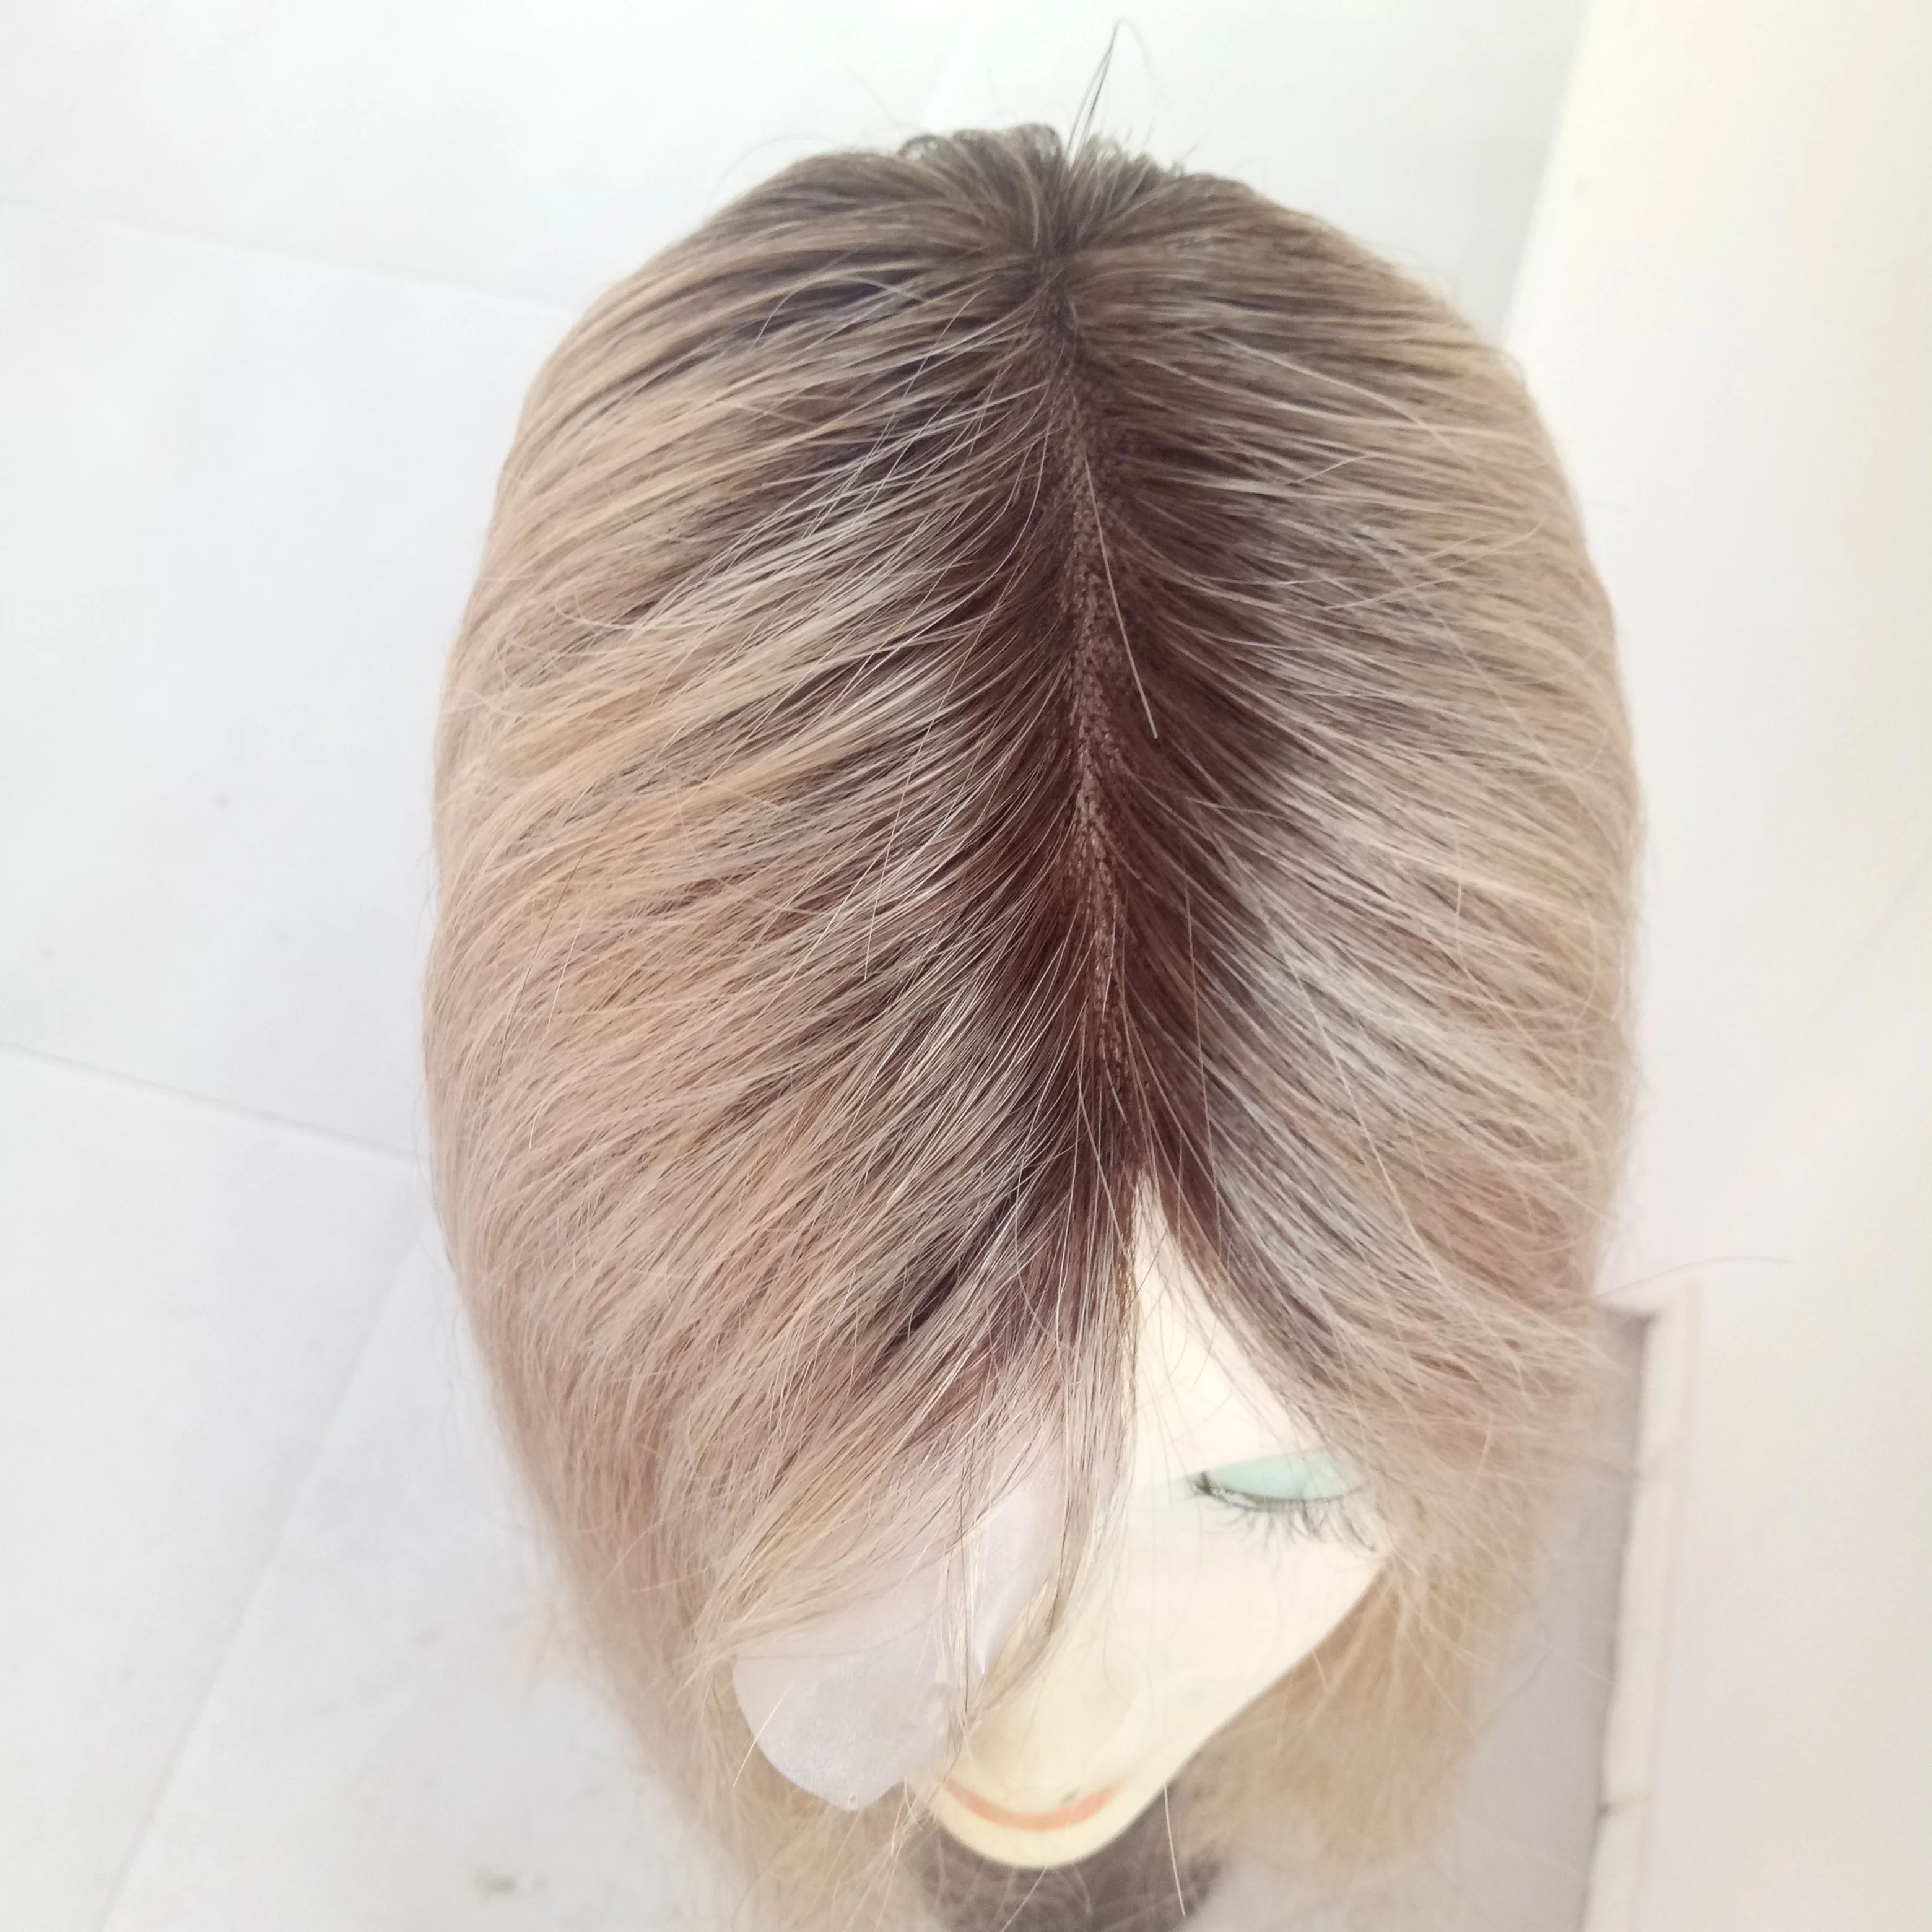 

Qingdao remy human hair toupee/topper for women with long hair human hair toupee, Ombre blonde color